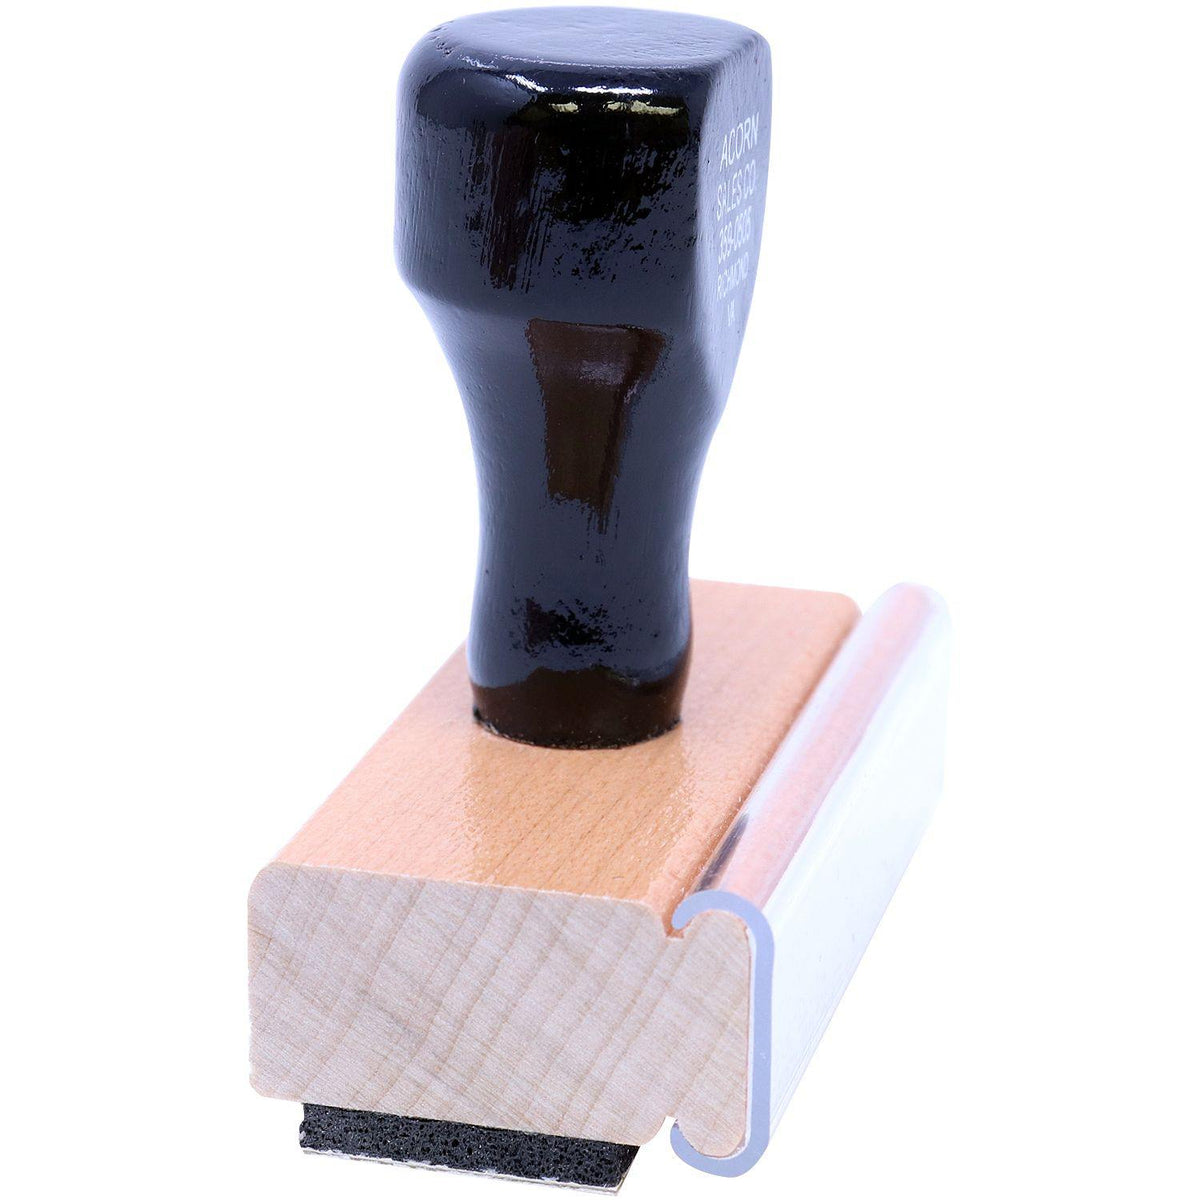 Side View of Avis De Receiption Rubber Stamp at an Angle